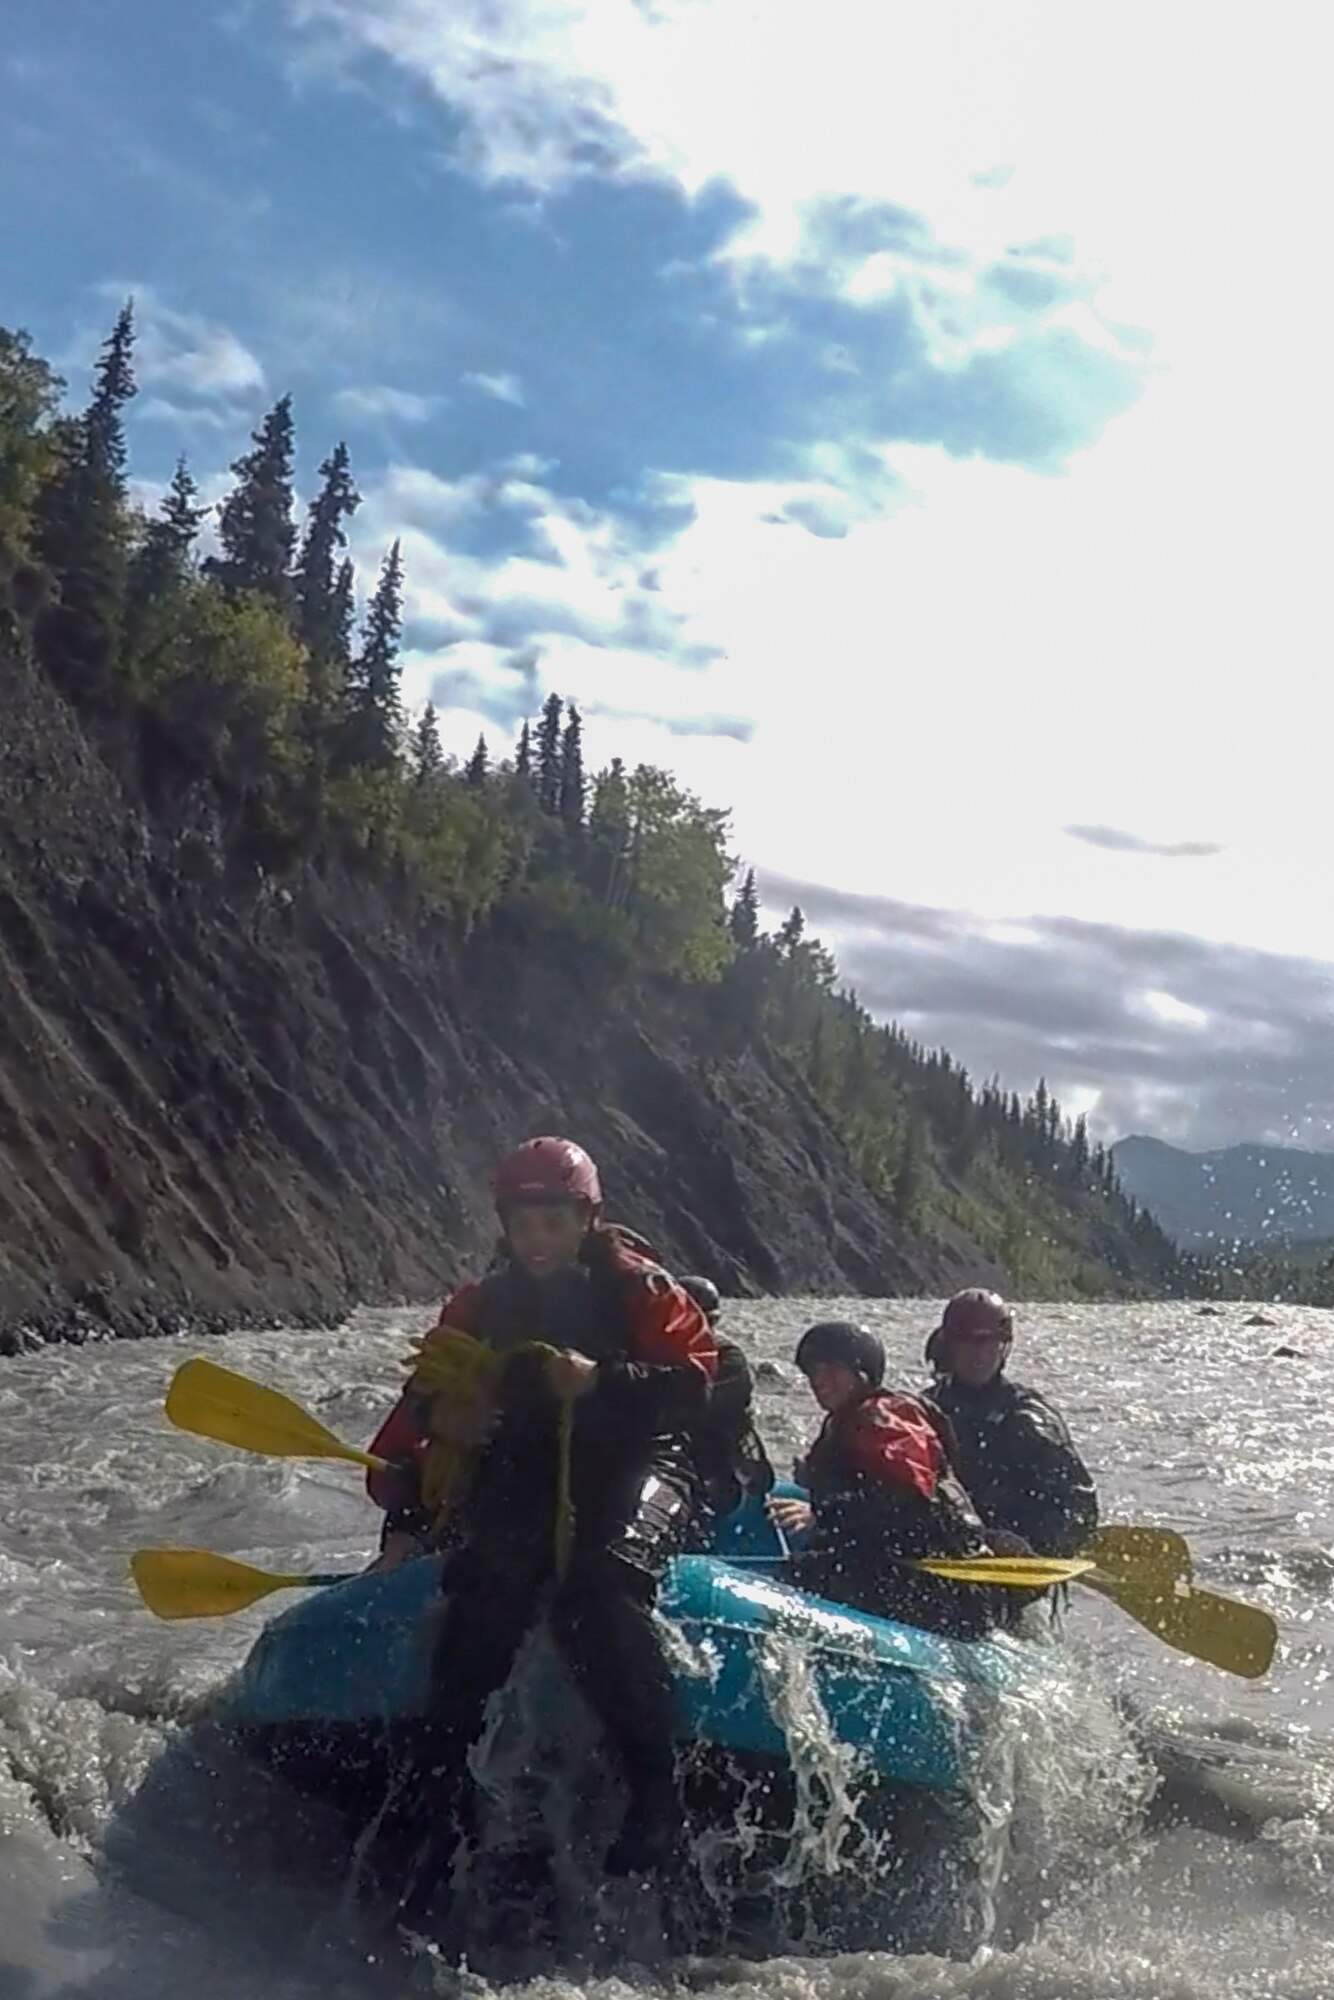 Members from the 673d Civil Engineer Group ride whitewater rapids on the Matanuska River, Alaska, as a Task Force True North activity July 26, 2019. Task Force True North is an initiative started in July 2018 to address Comprehensive Airman Fitness and decrease negative outcomes like sexual assault, suicide, domestic and workplace violence. Task Force True North embeds a religious support team and mental health counselors in groups to decentralize resources available to Airmen.